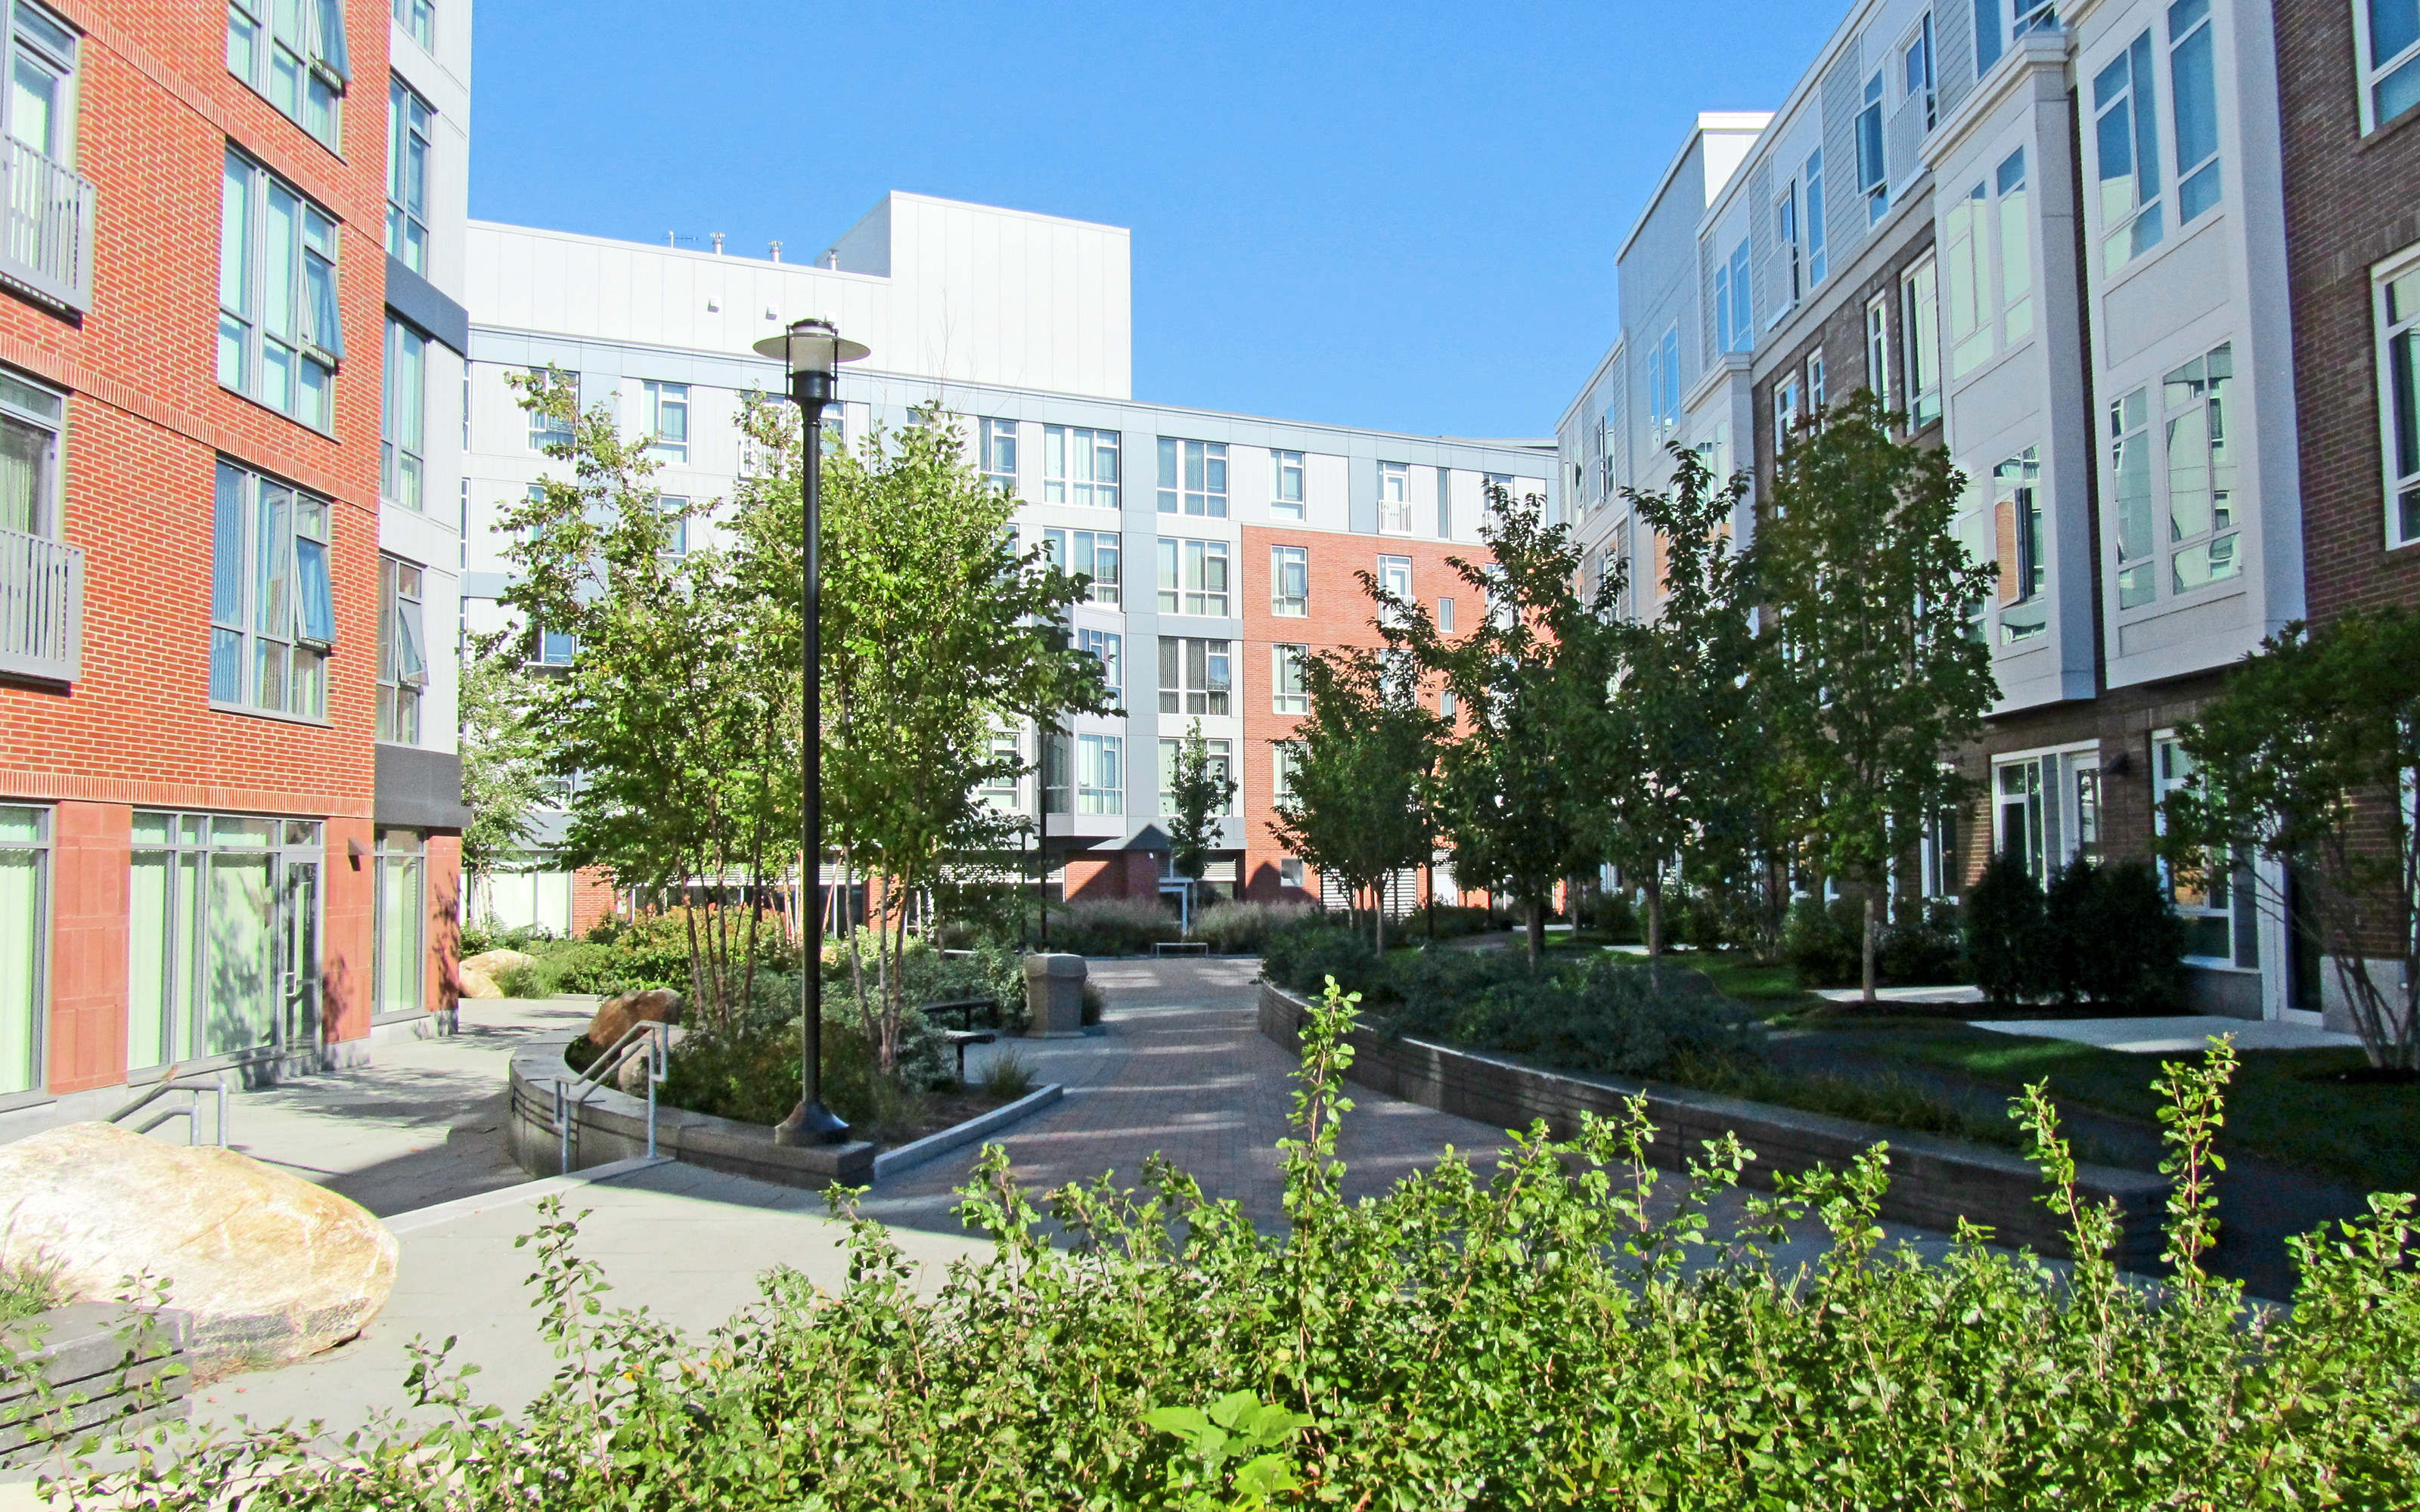 Green courtyard with shrubs and small trees surrounded by residential buildings